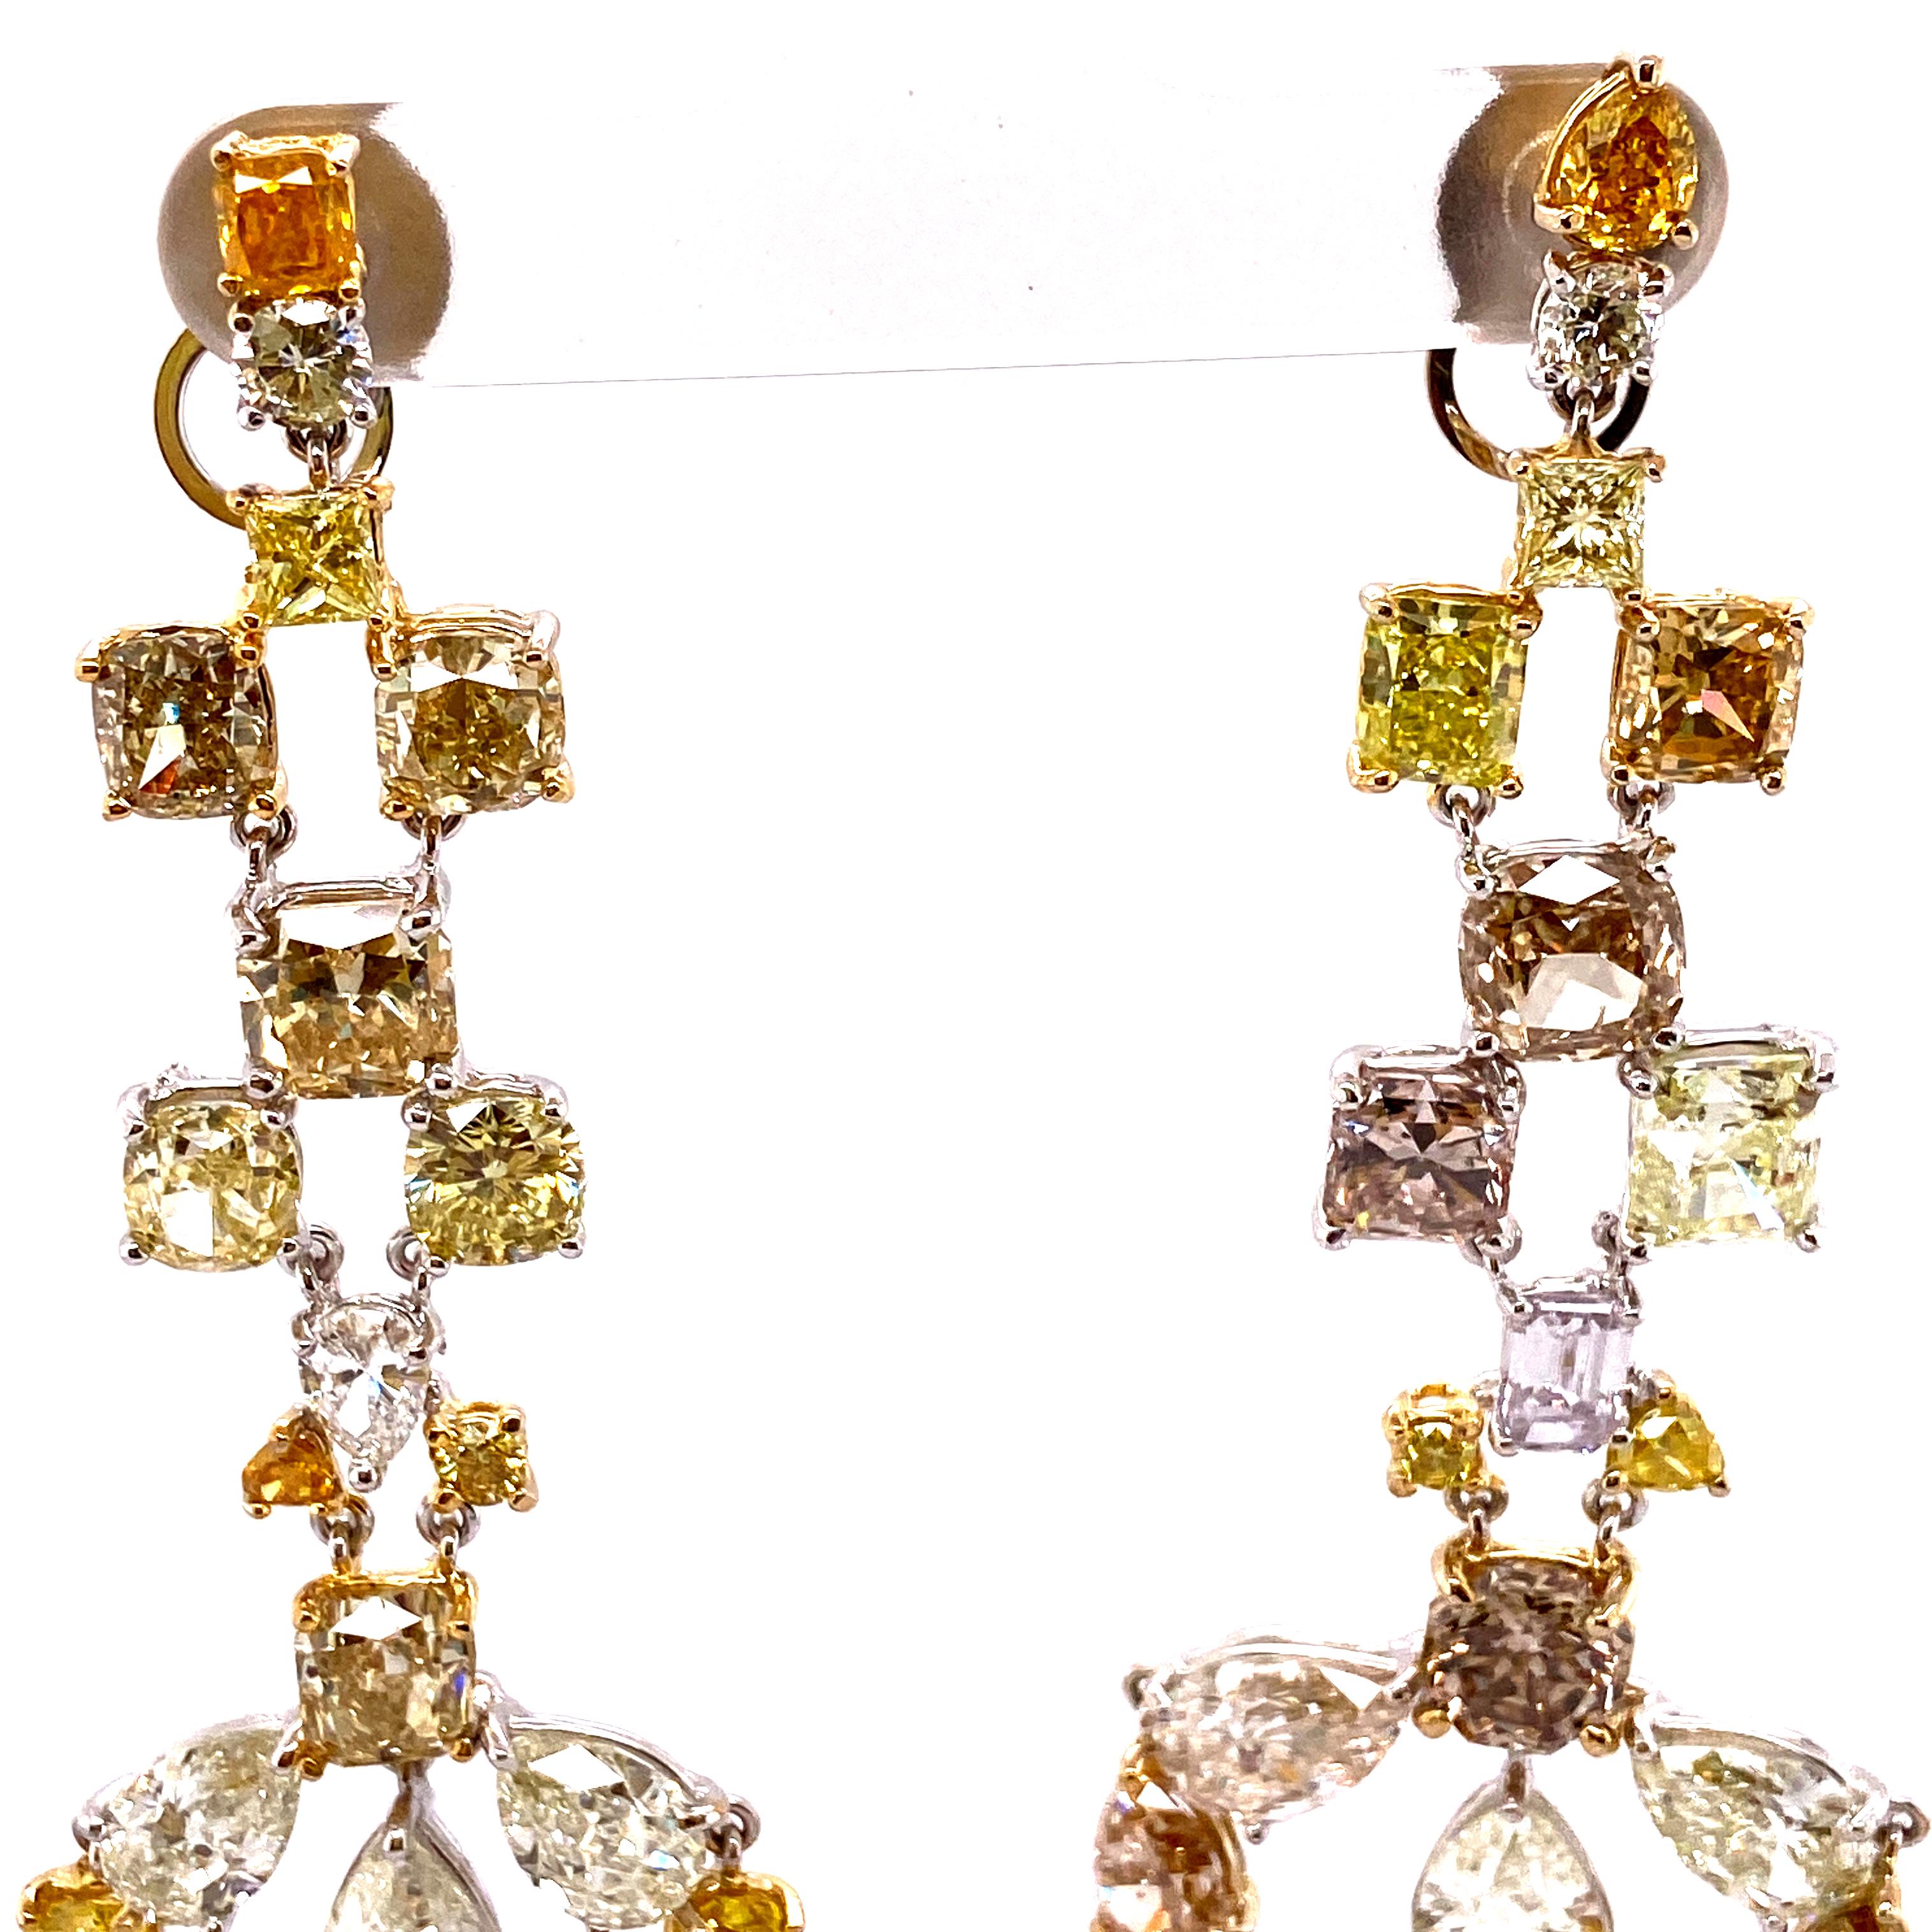 57.64 Carat Fancy Coloured Diamonds and White Diamond Chandelier Gold Three-Way Detachable Earrings:

An incredibly rare collection of white and fancy coloured diamonds, it features a staggering 66 pieces of diamonds with varying hues and tones